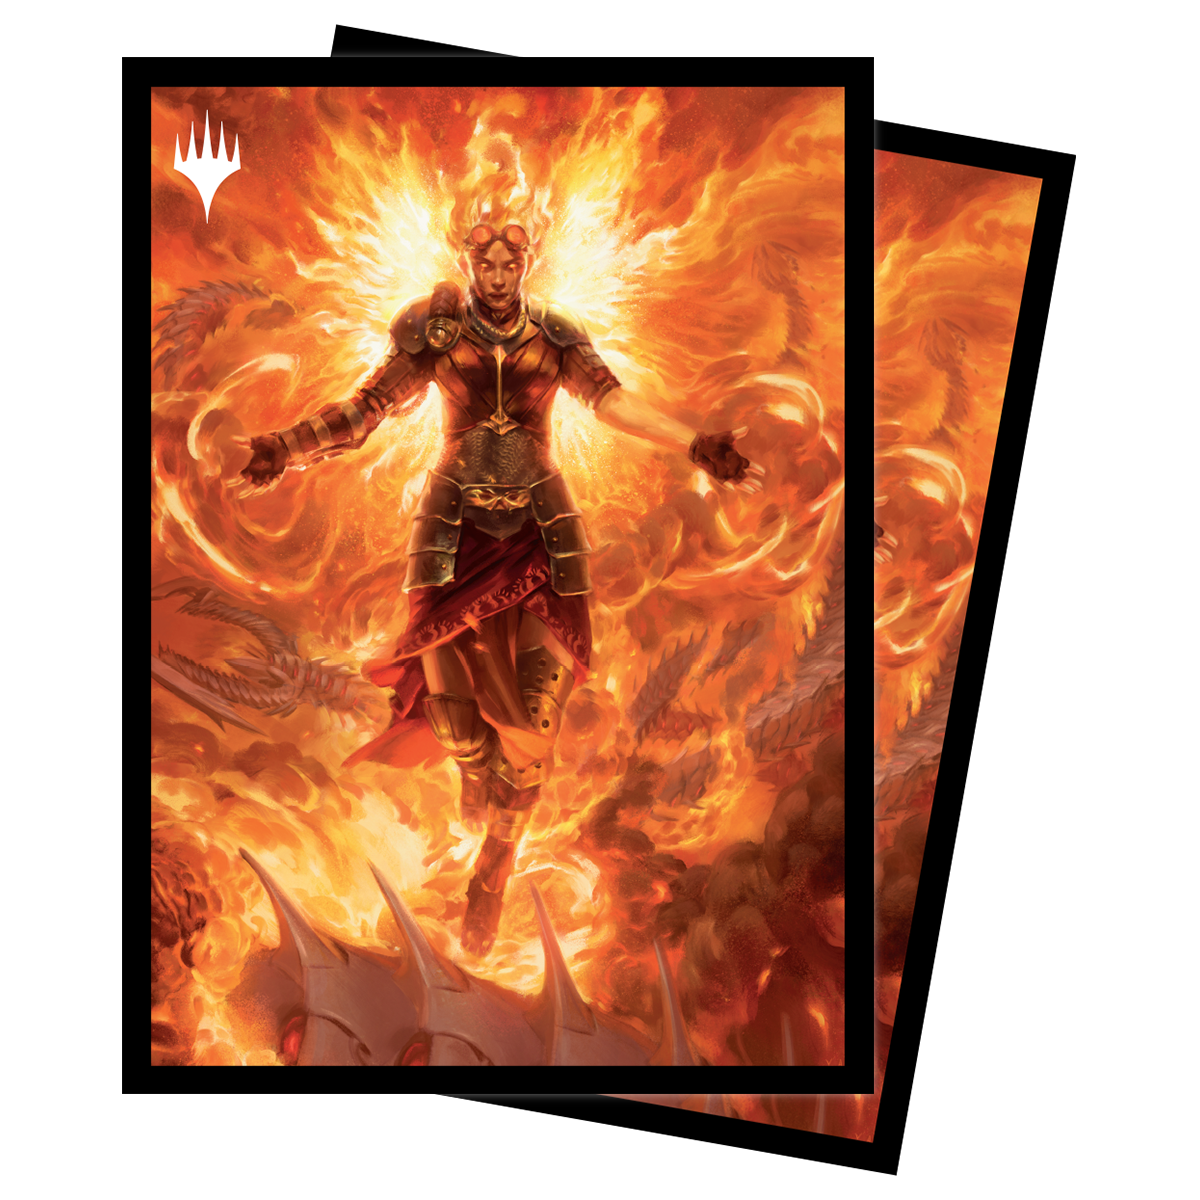 March of the Machine Chandra, Hope’s Beacon Standard Deck Protector Sleeves (100ct) for Magic: The Gathering | Ultra PRO International